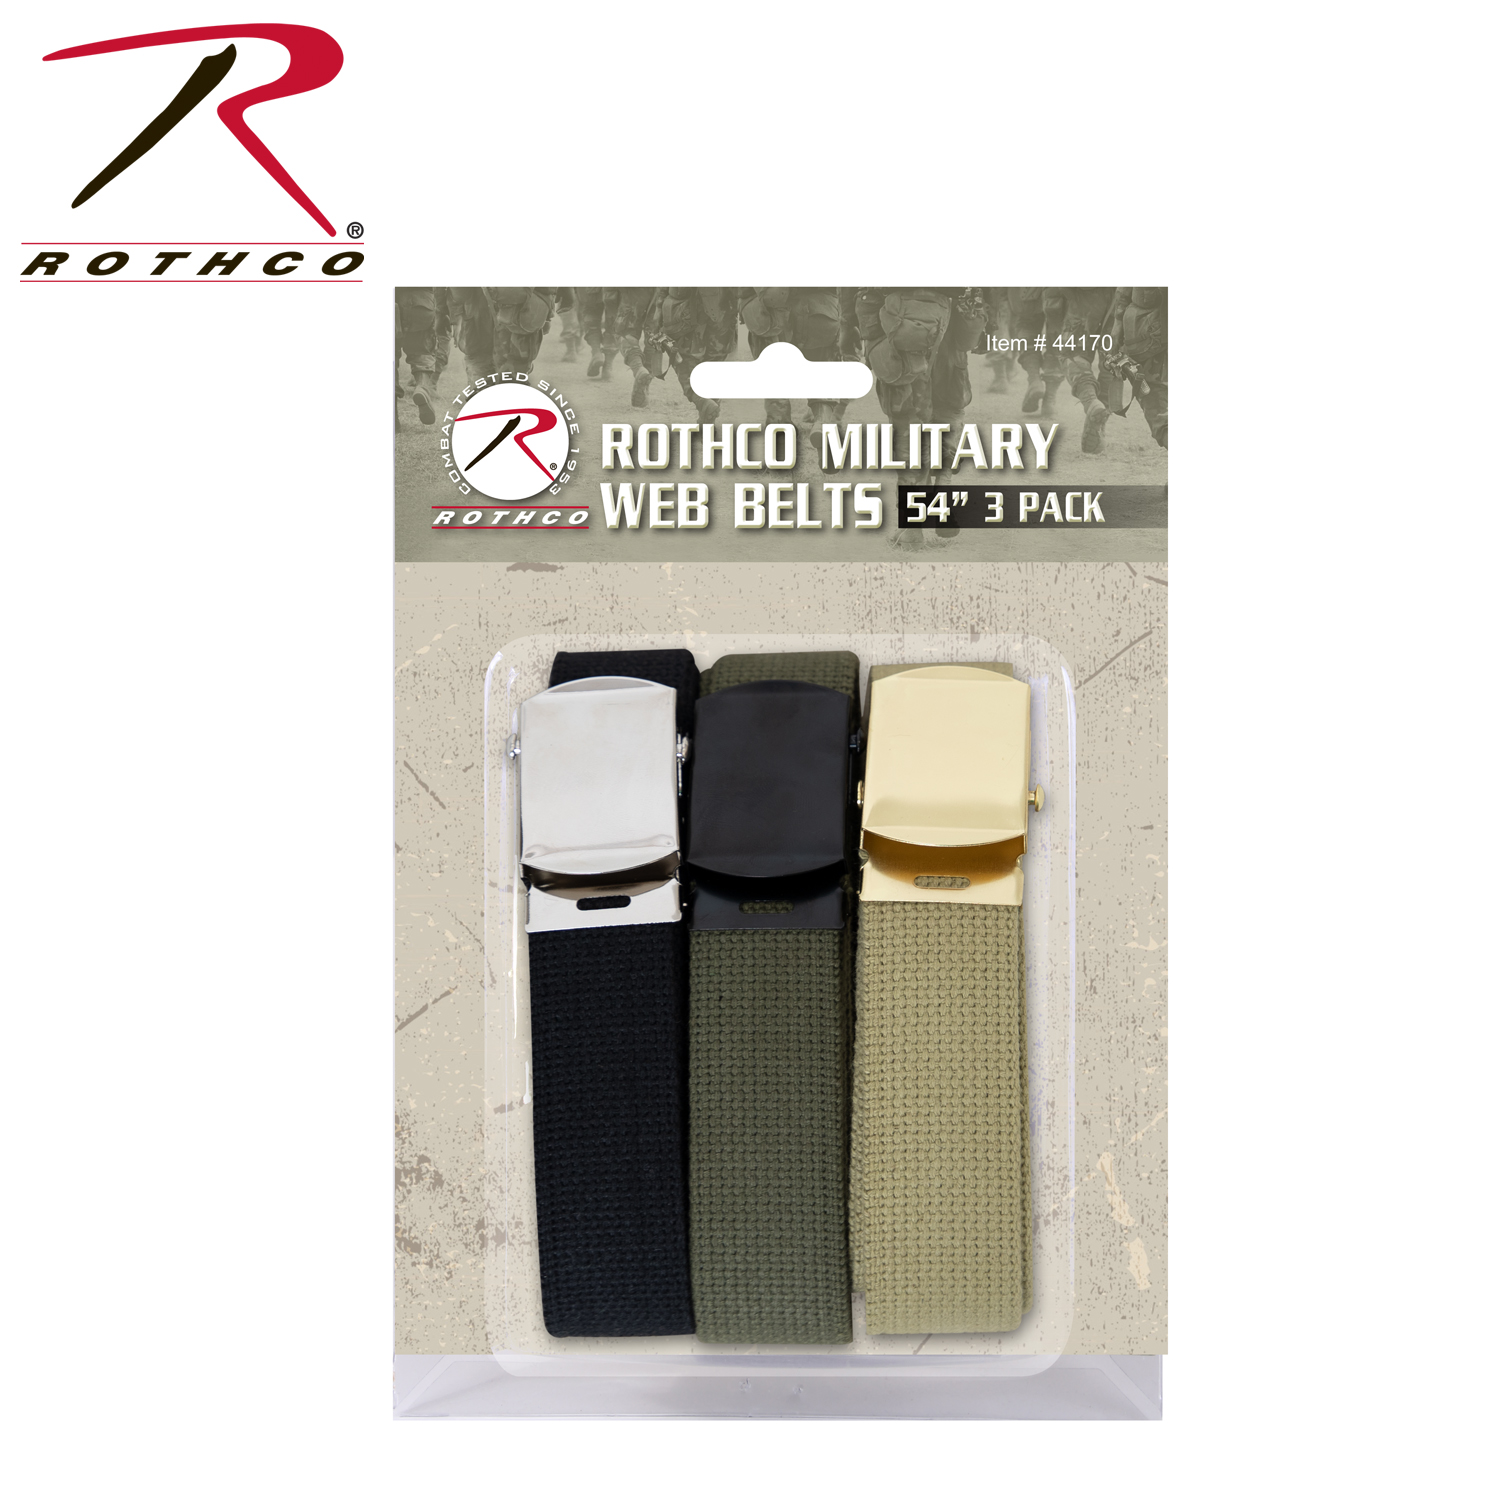 Rothco 54 Inch Military Web Belts in 3 Pack